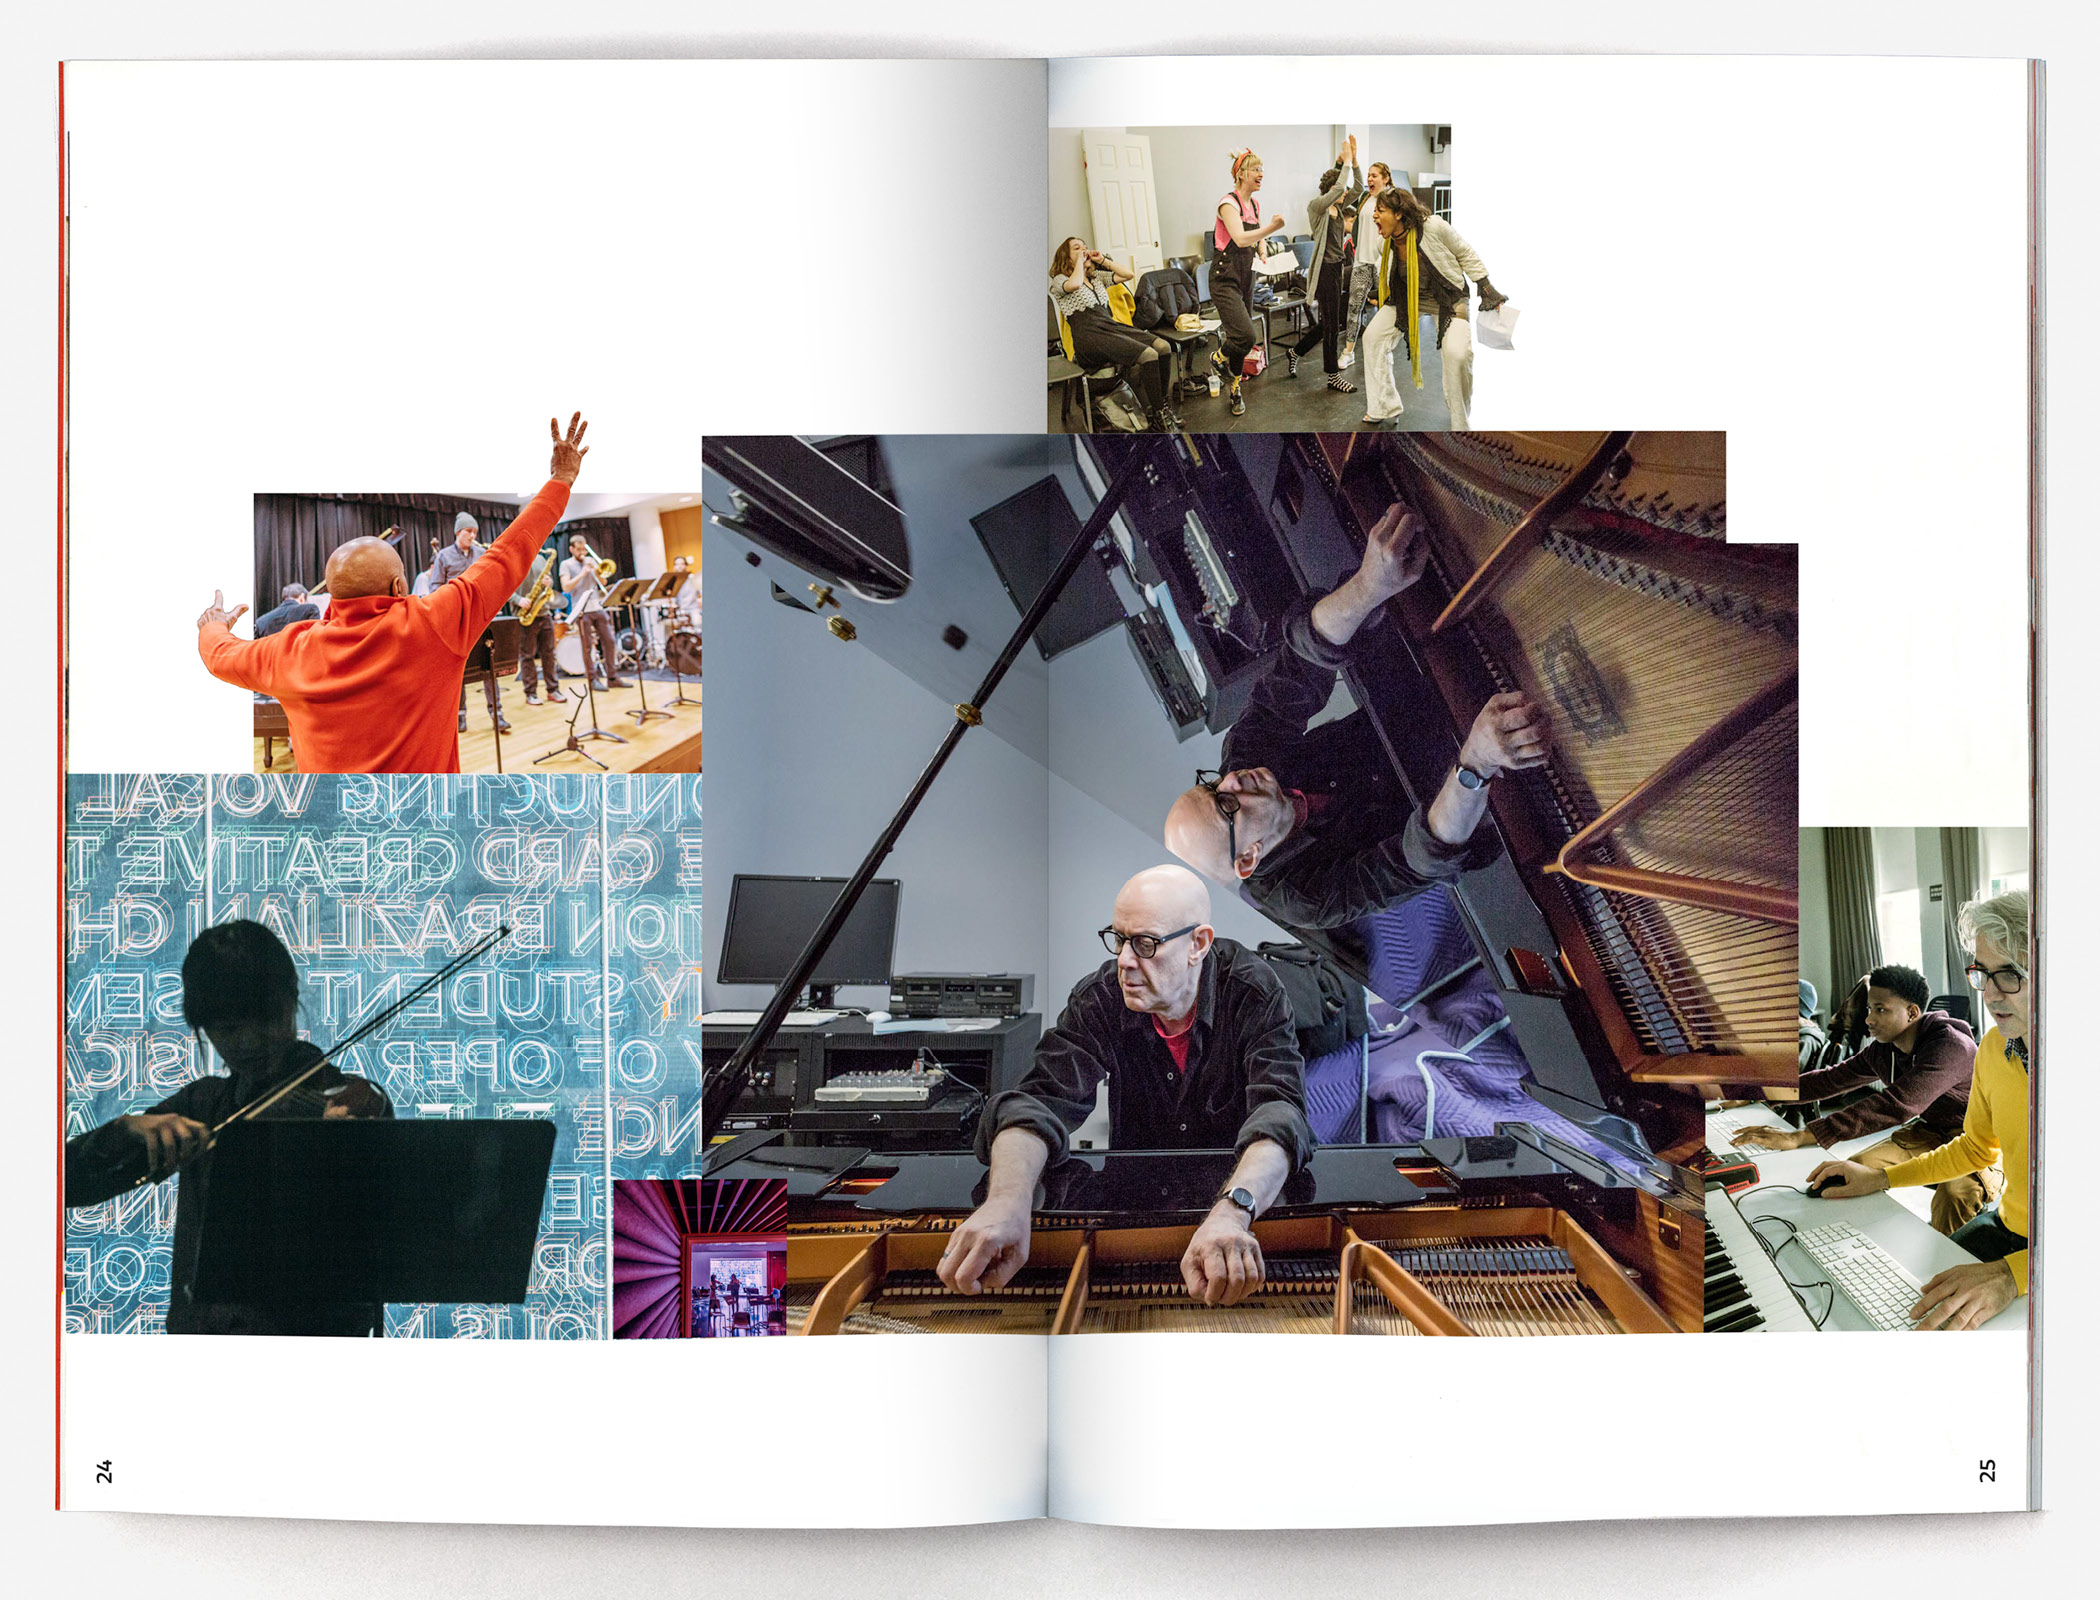 Spread with a collage of people performing